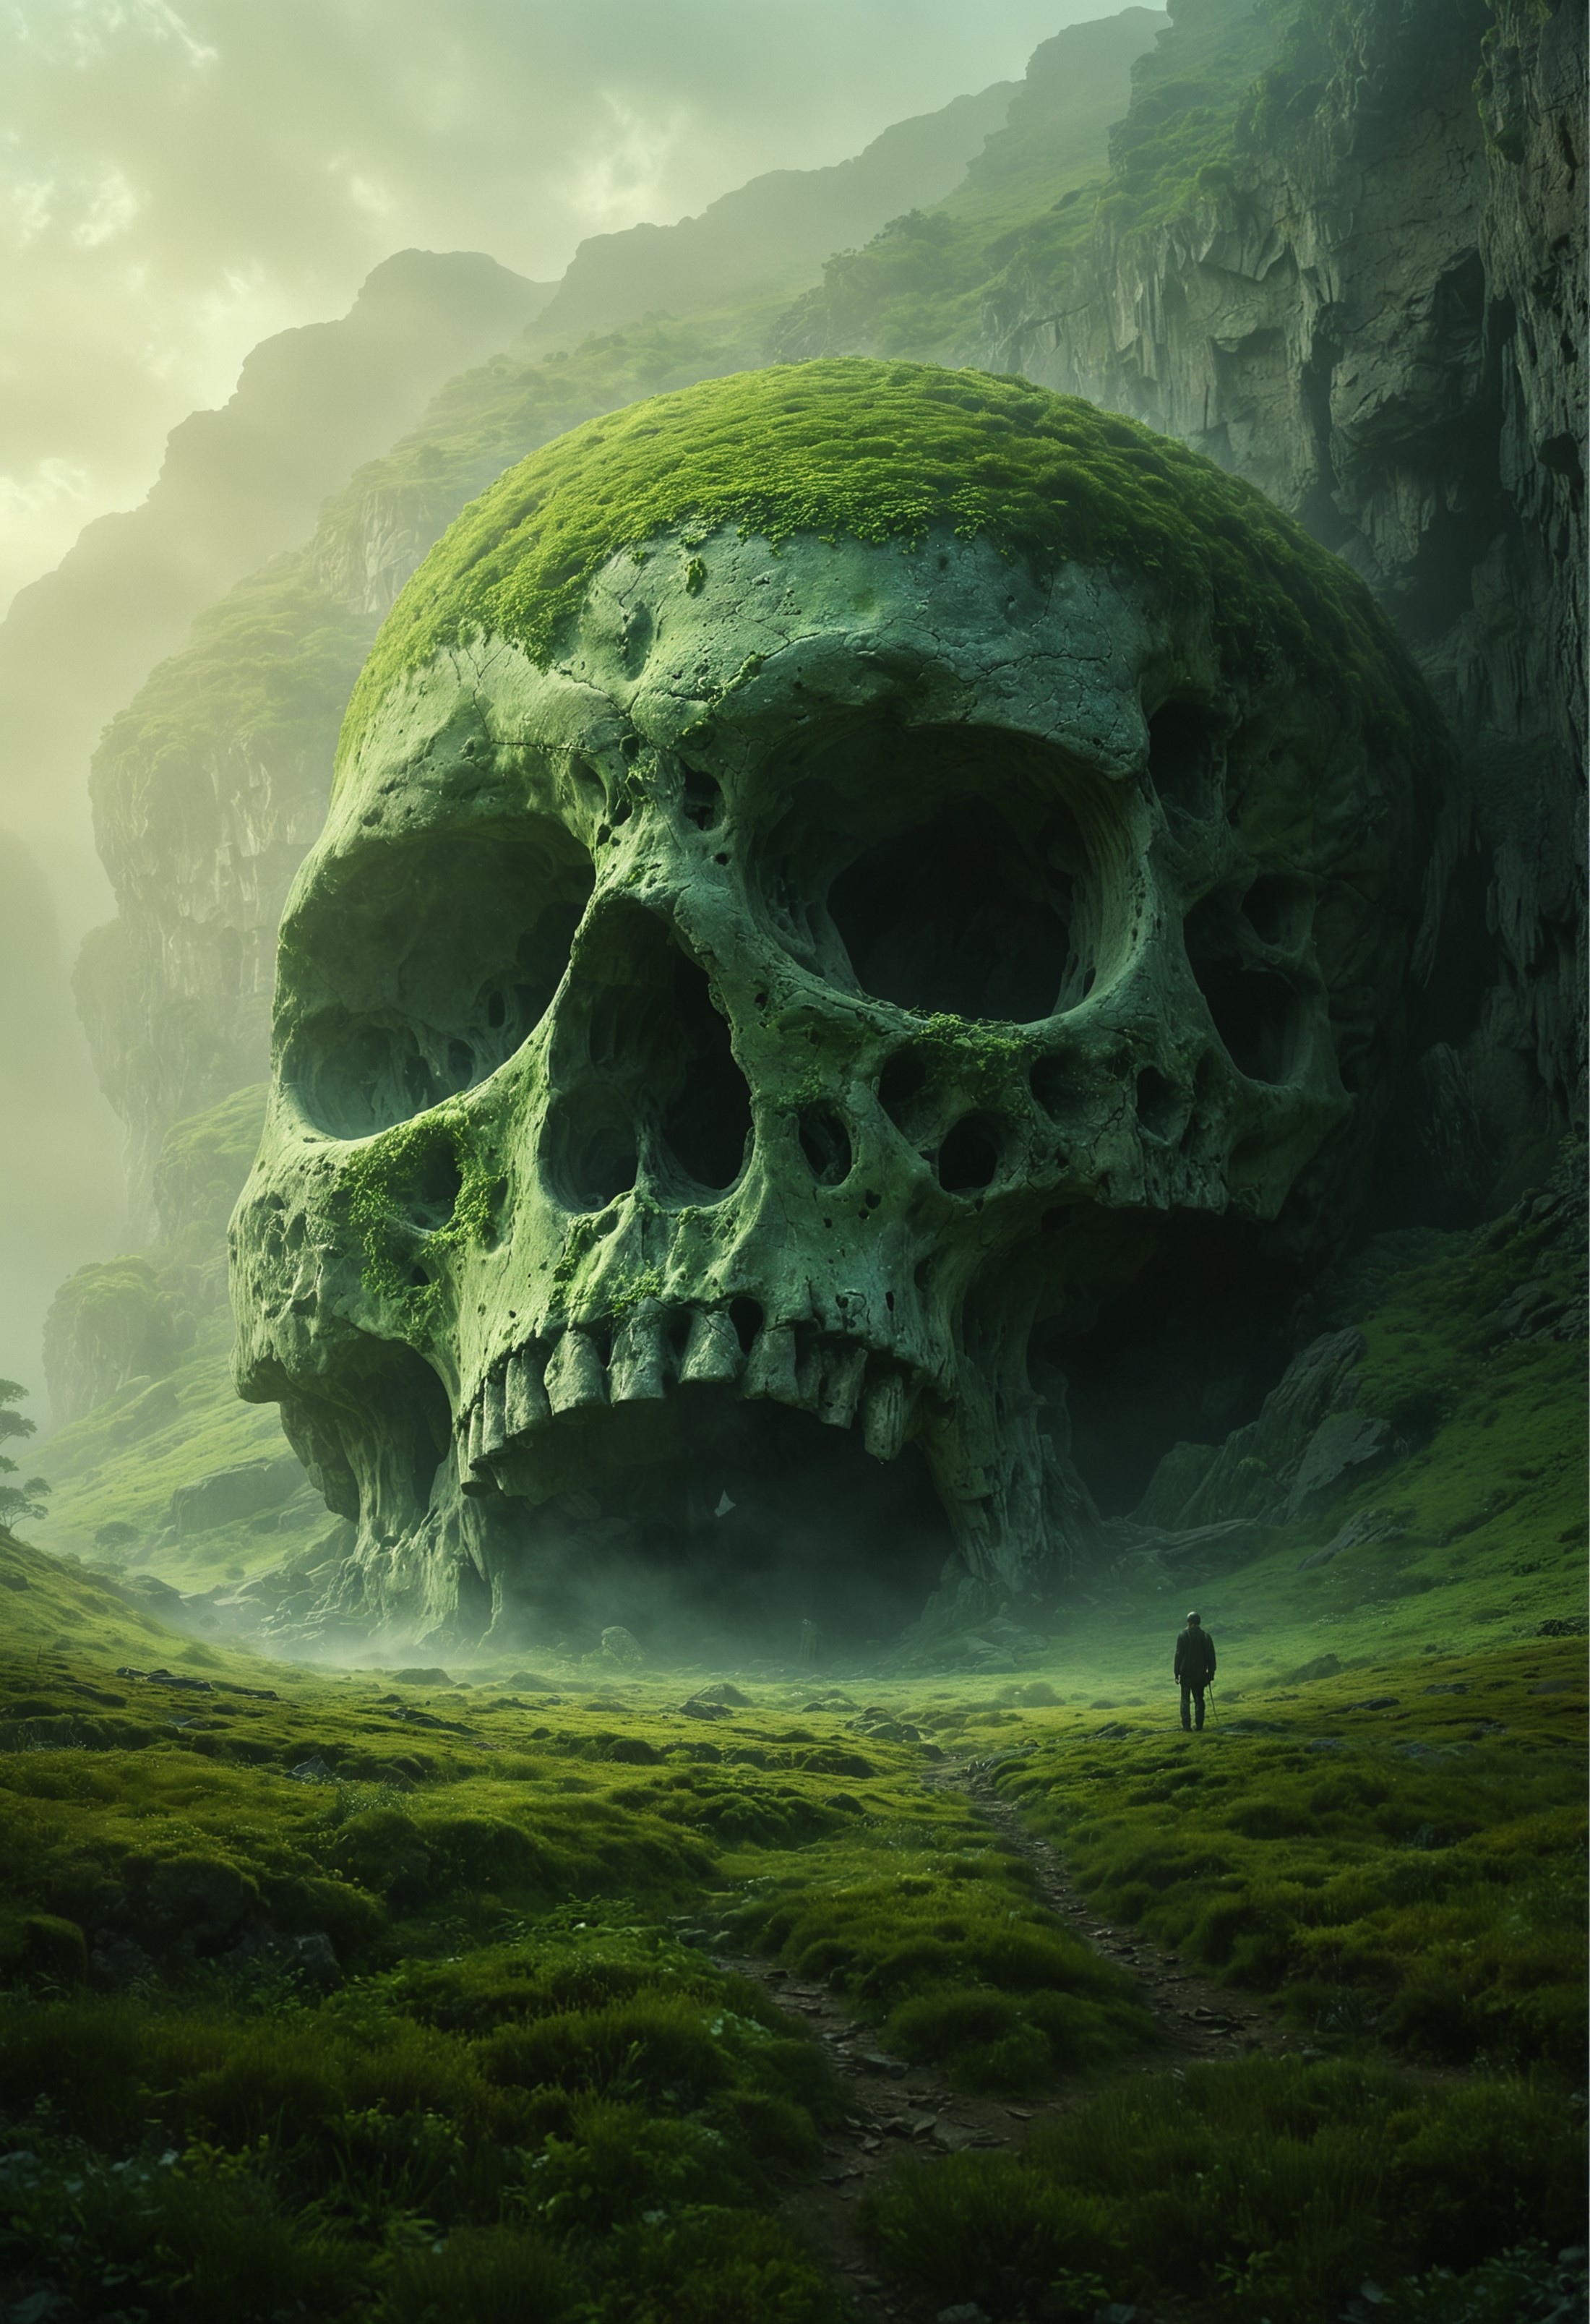 A colossal human skull overgrown with green moss, set in a misty, verdant valley surrounded by towering cliffs. A single human figure stands at the base of the path leading to the skull’s open mouth.